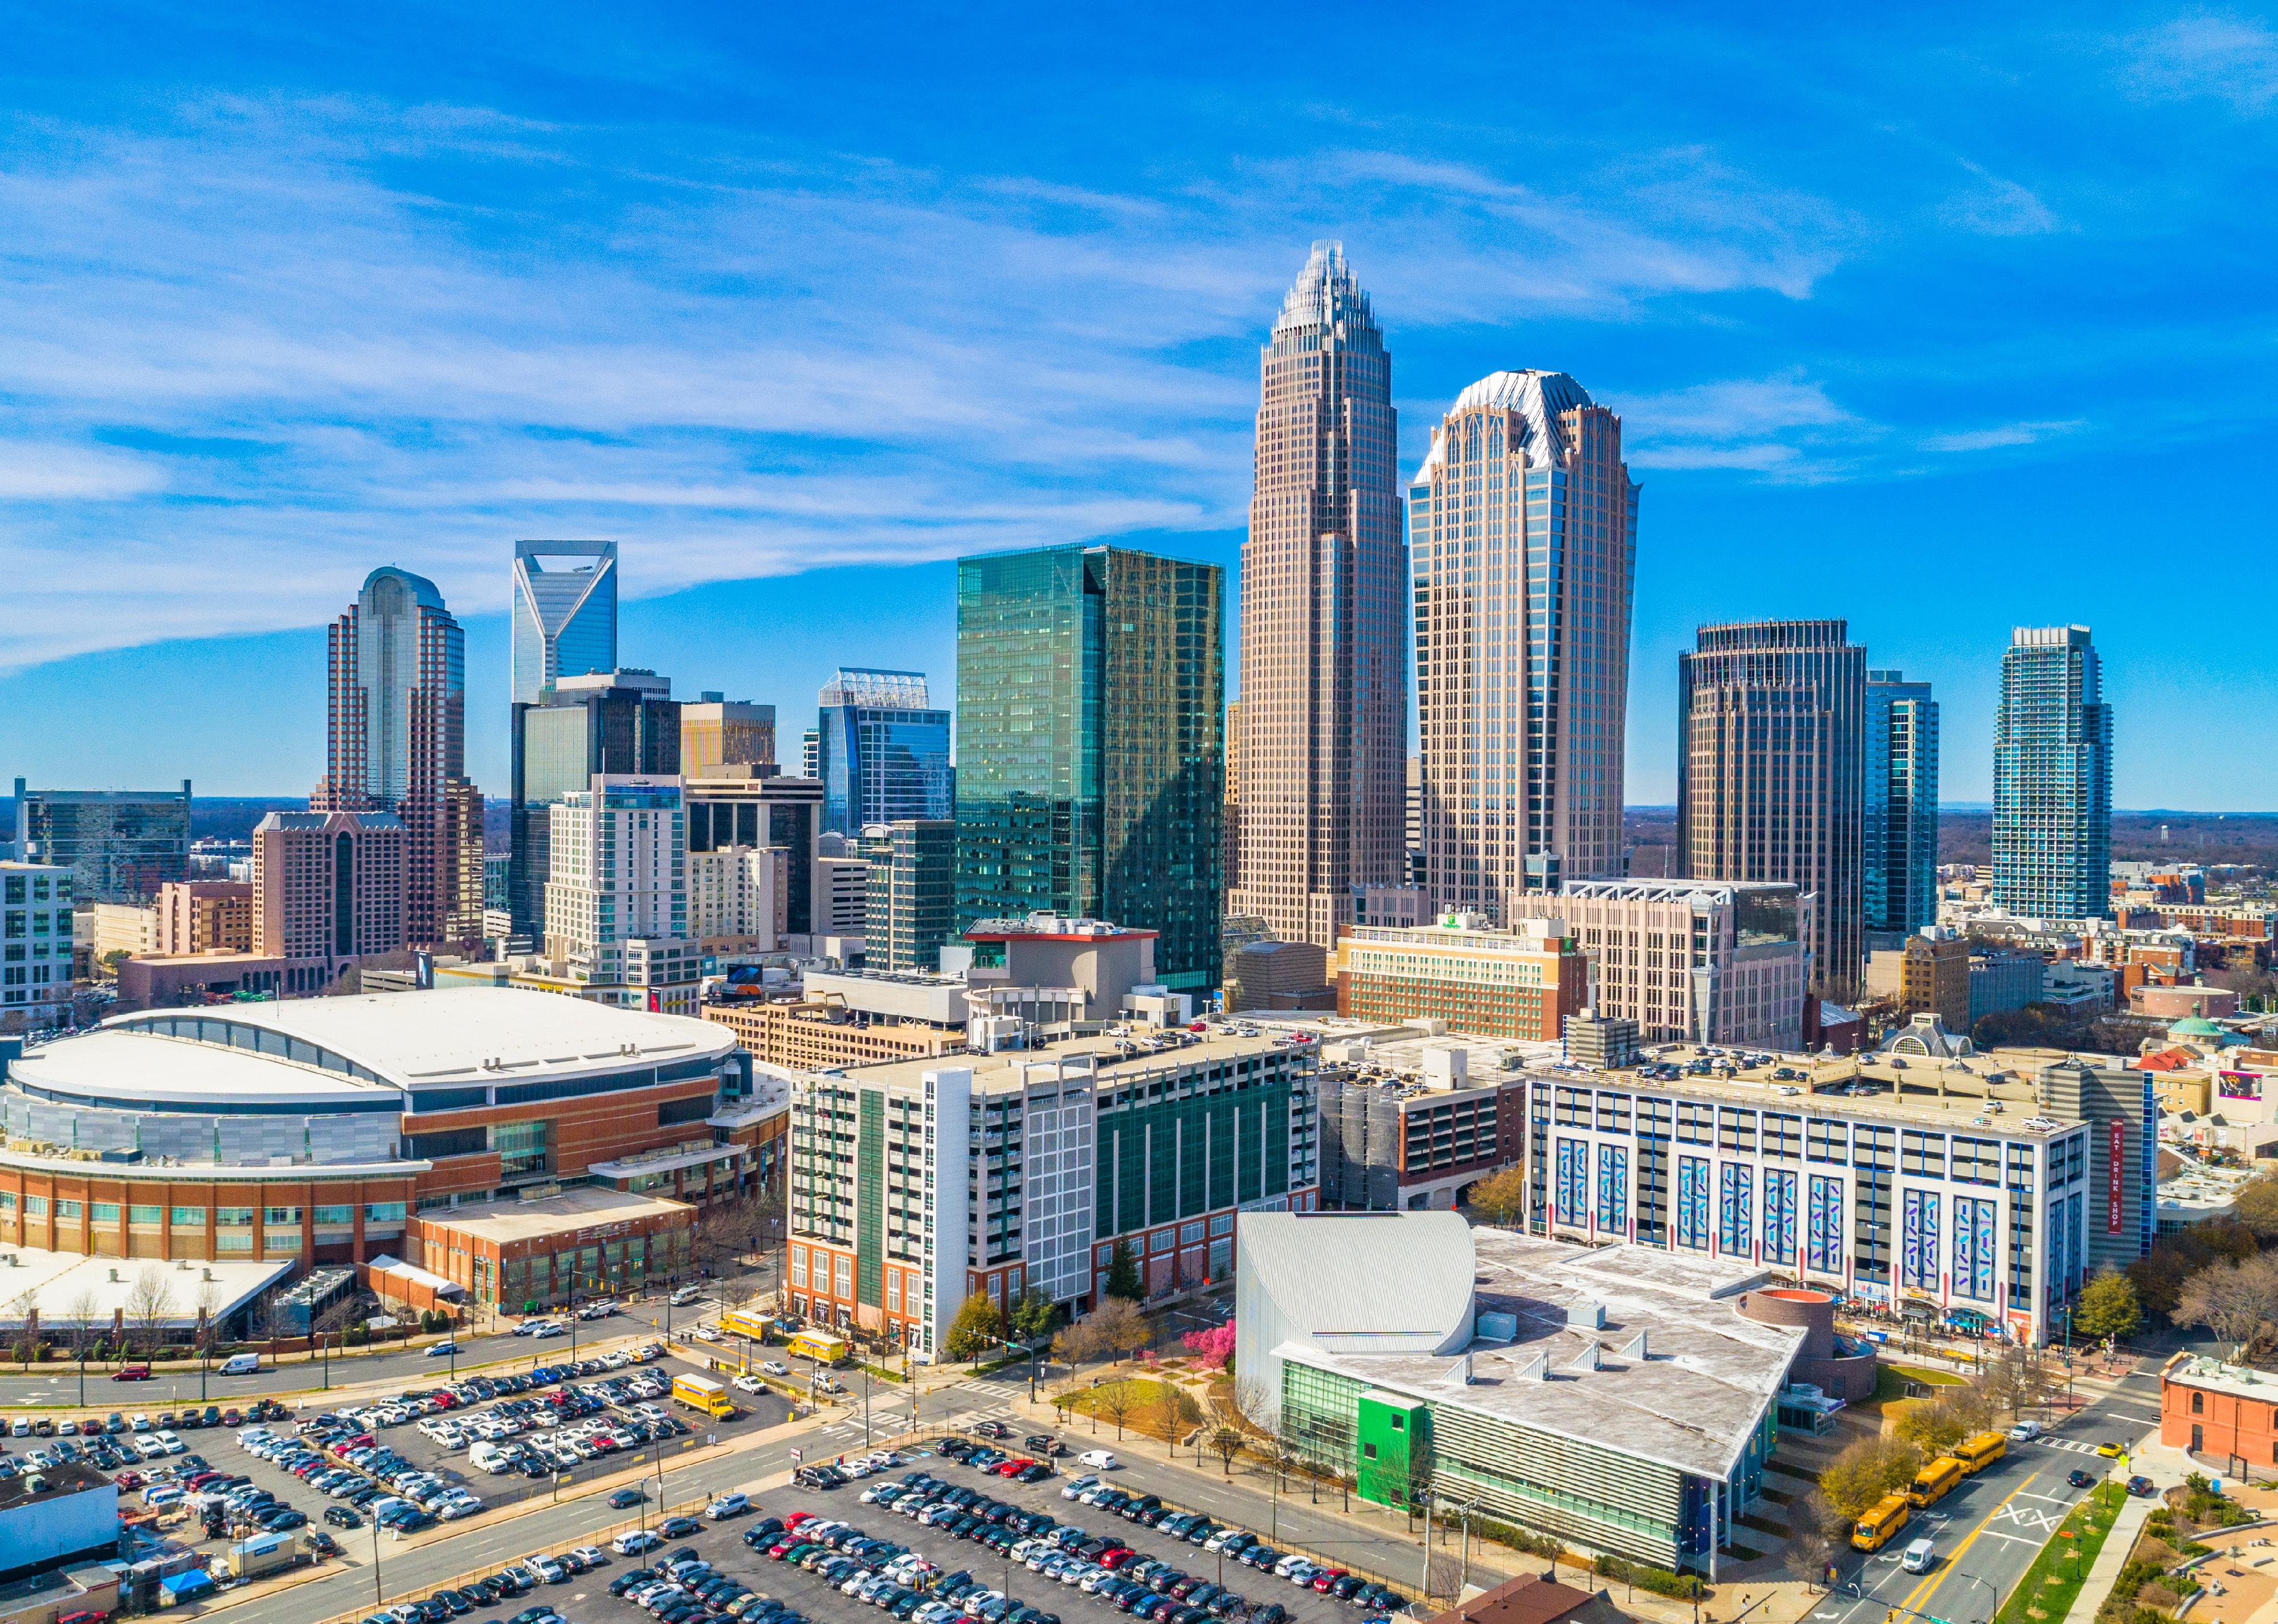 Aerial view of downtown Charlotte.